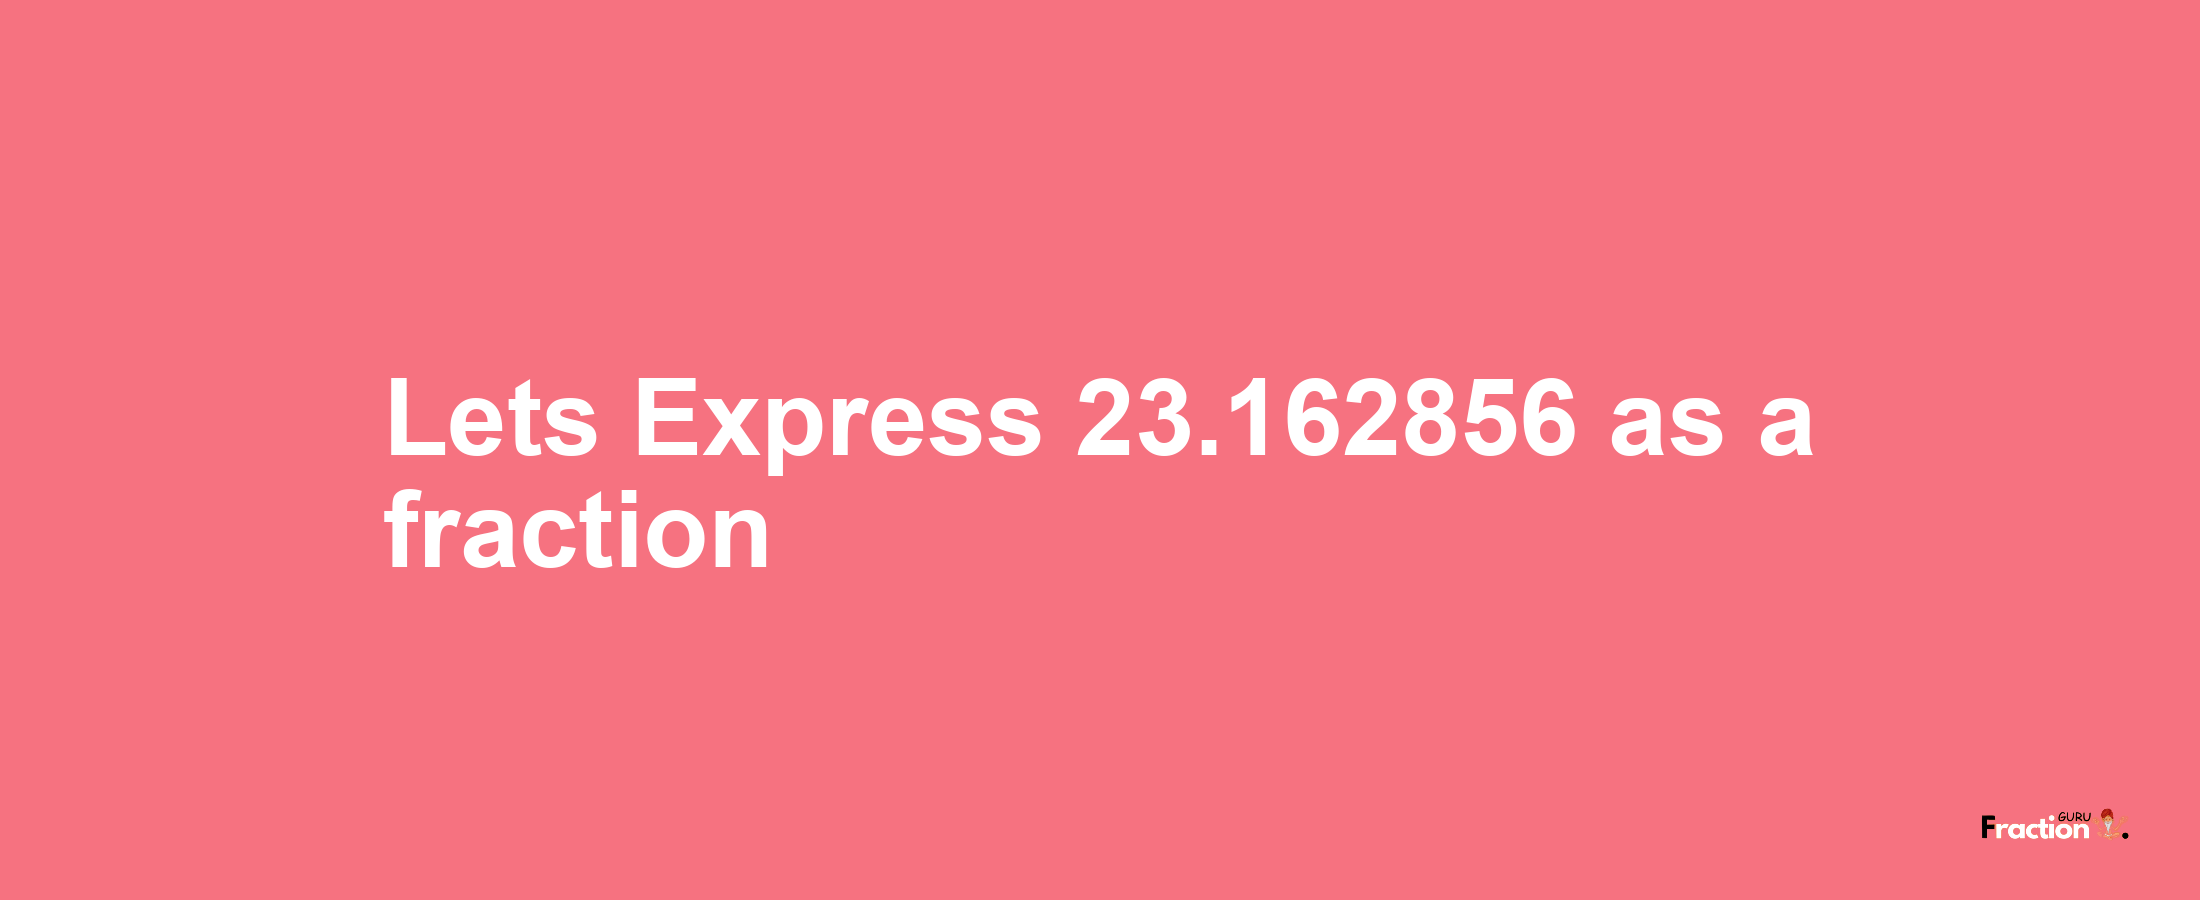 Lets Express 23.162856 as afraction